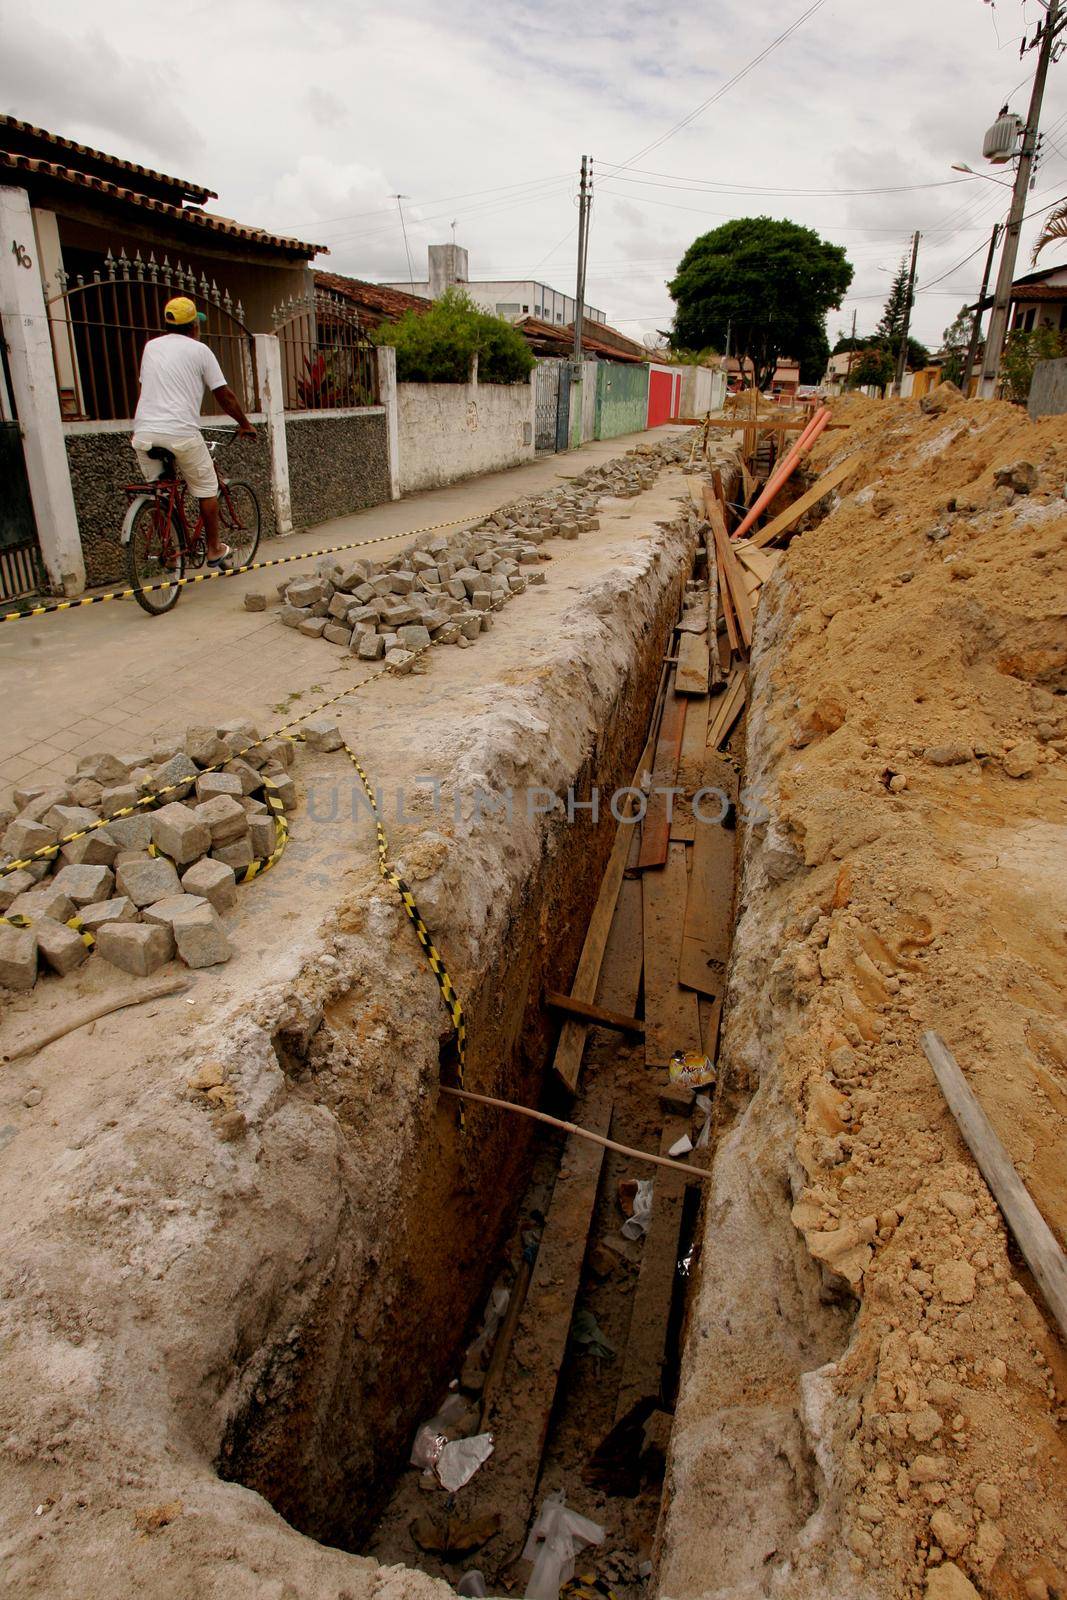 eunapolis, bahia / brazil - november 8, 2010: hole dug for the implementation of a sewage system in a street in the municipality of Eunapolis, southern Bahia.
